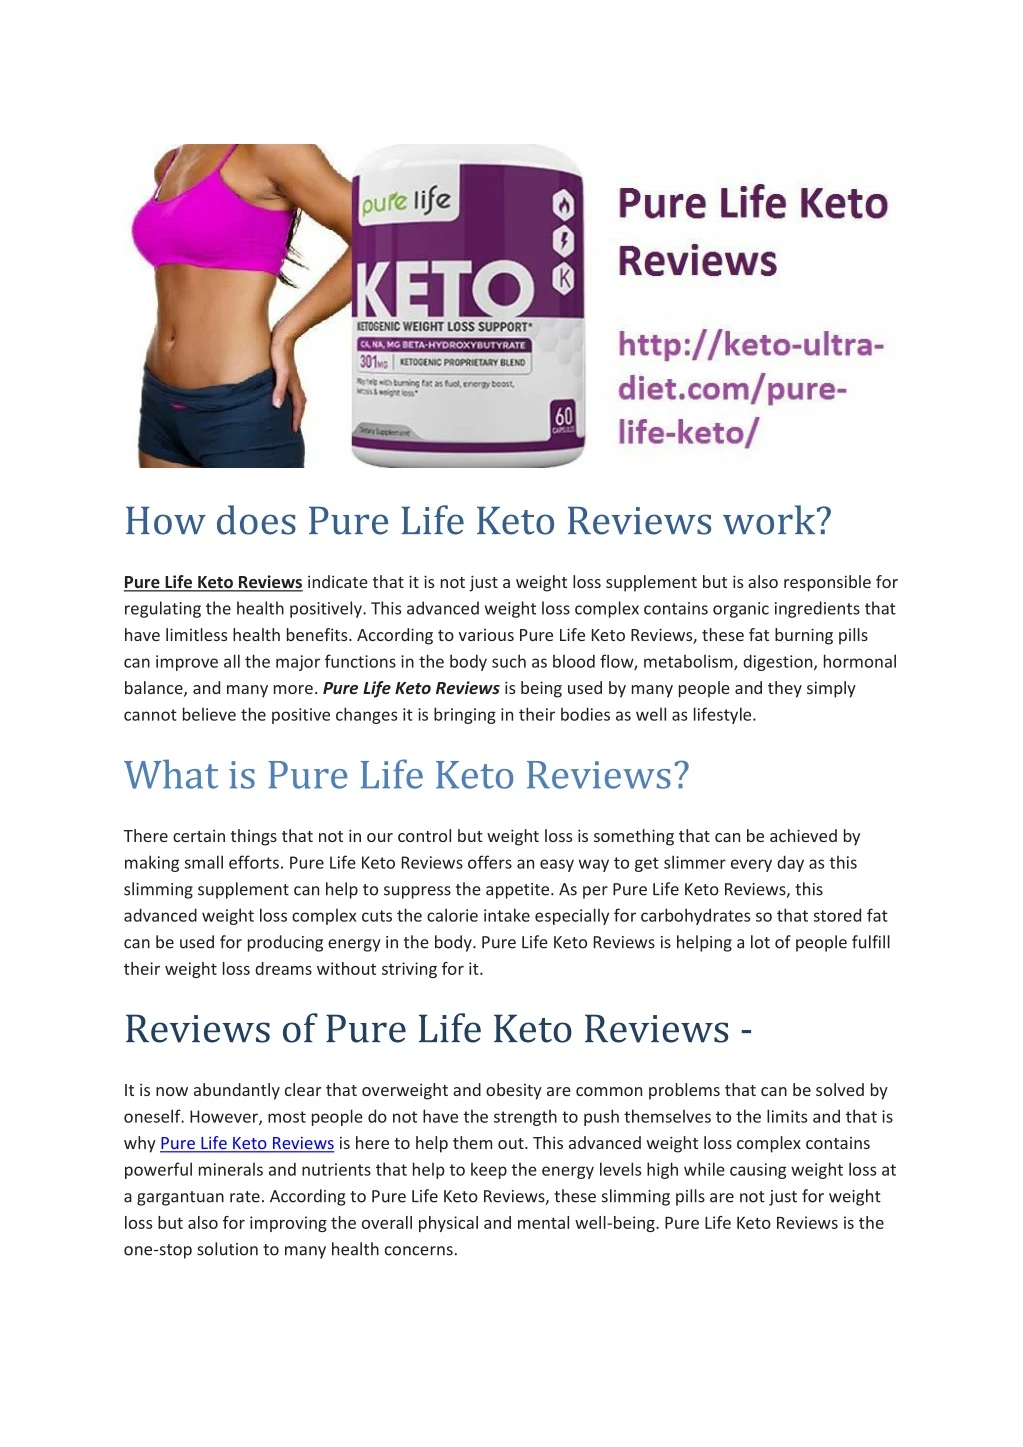 how does pure life keto reviews work